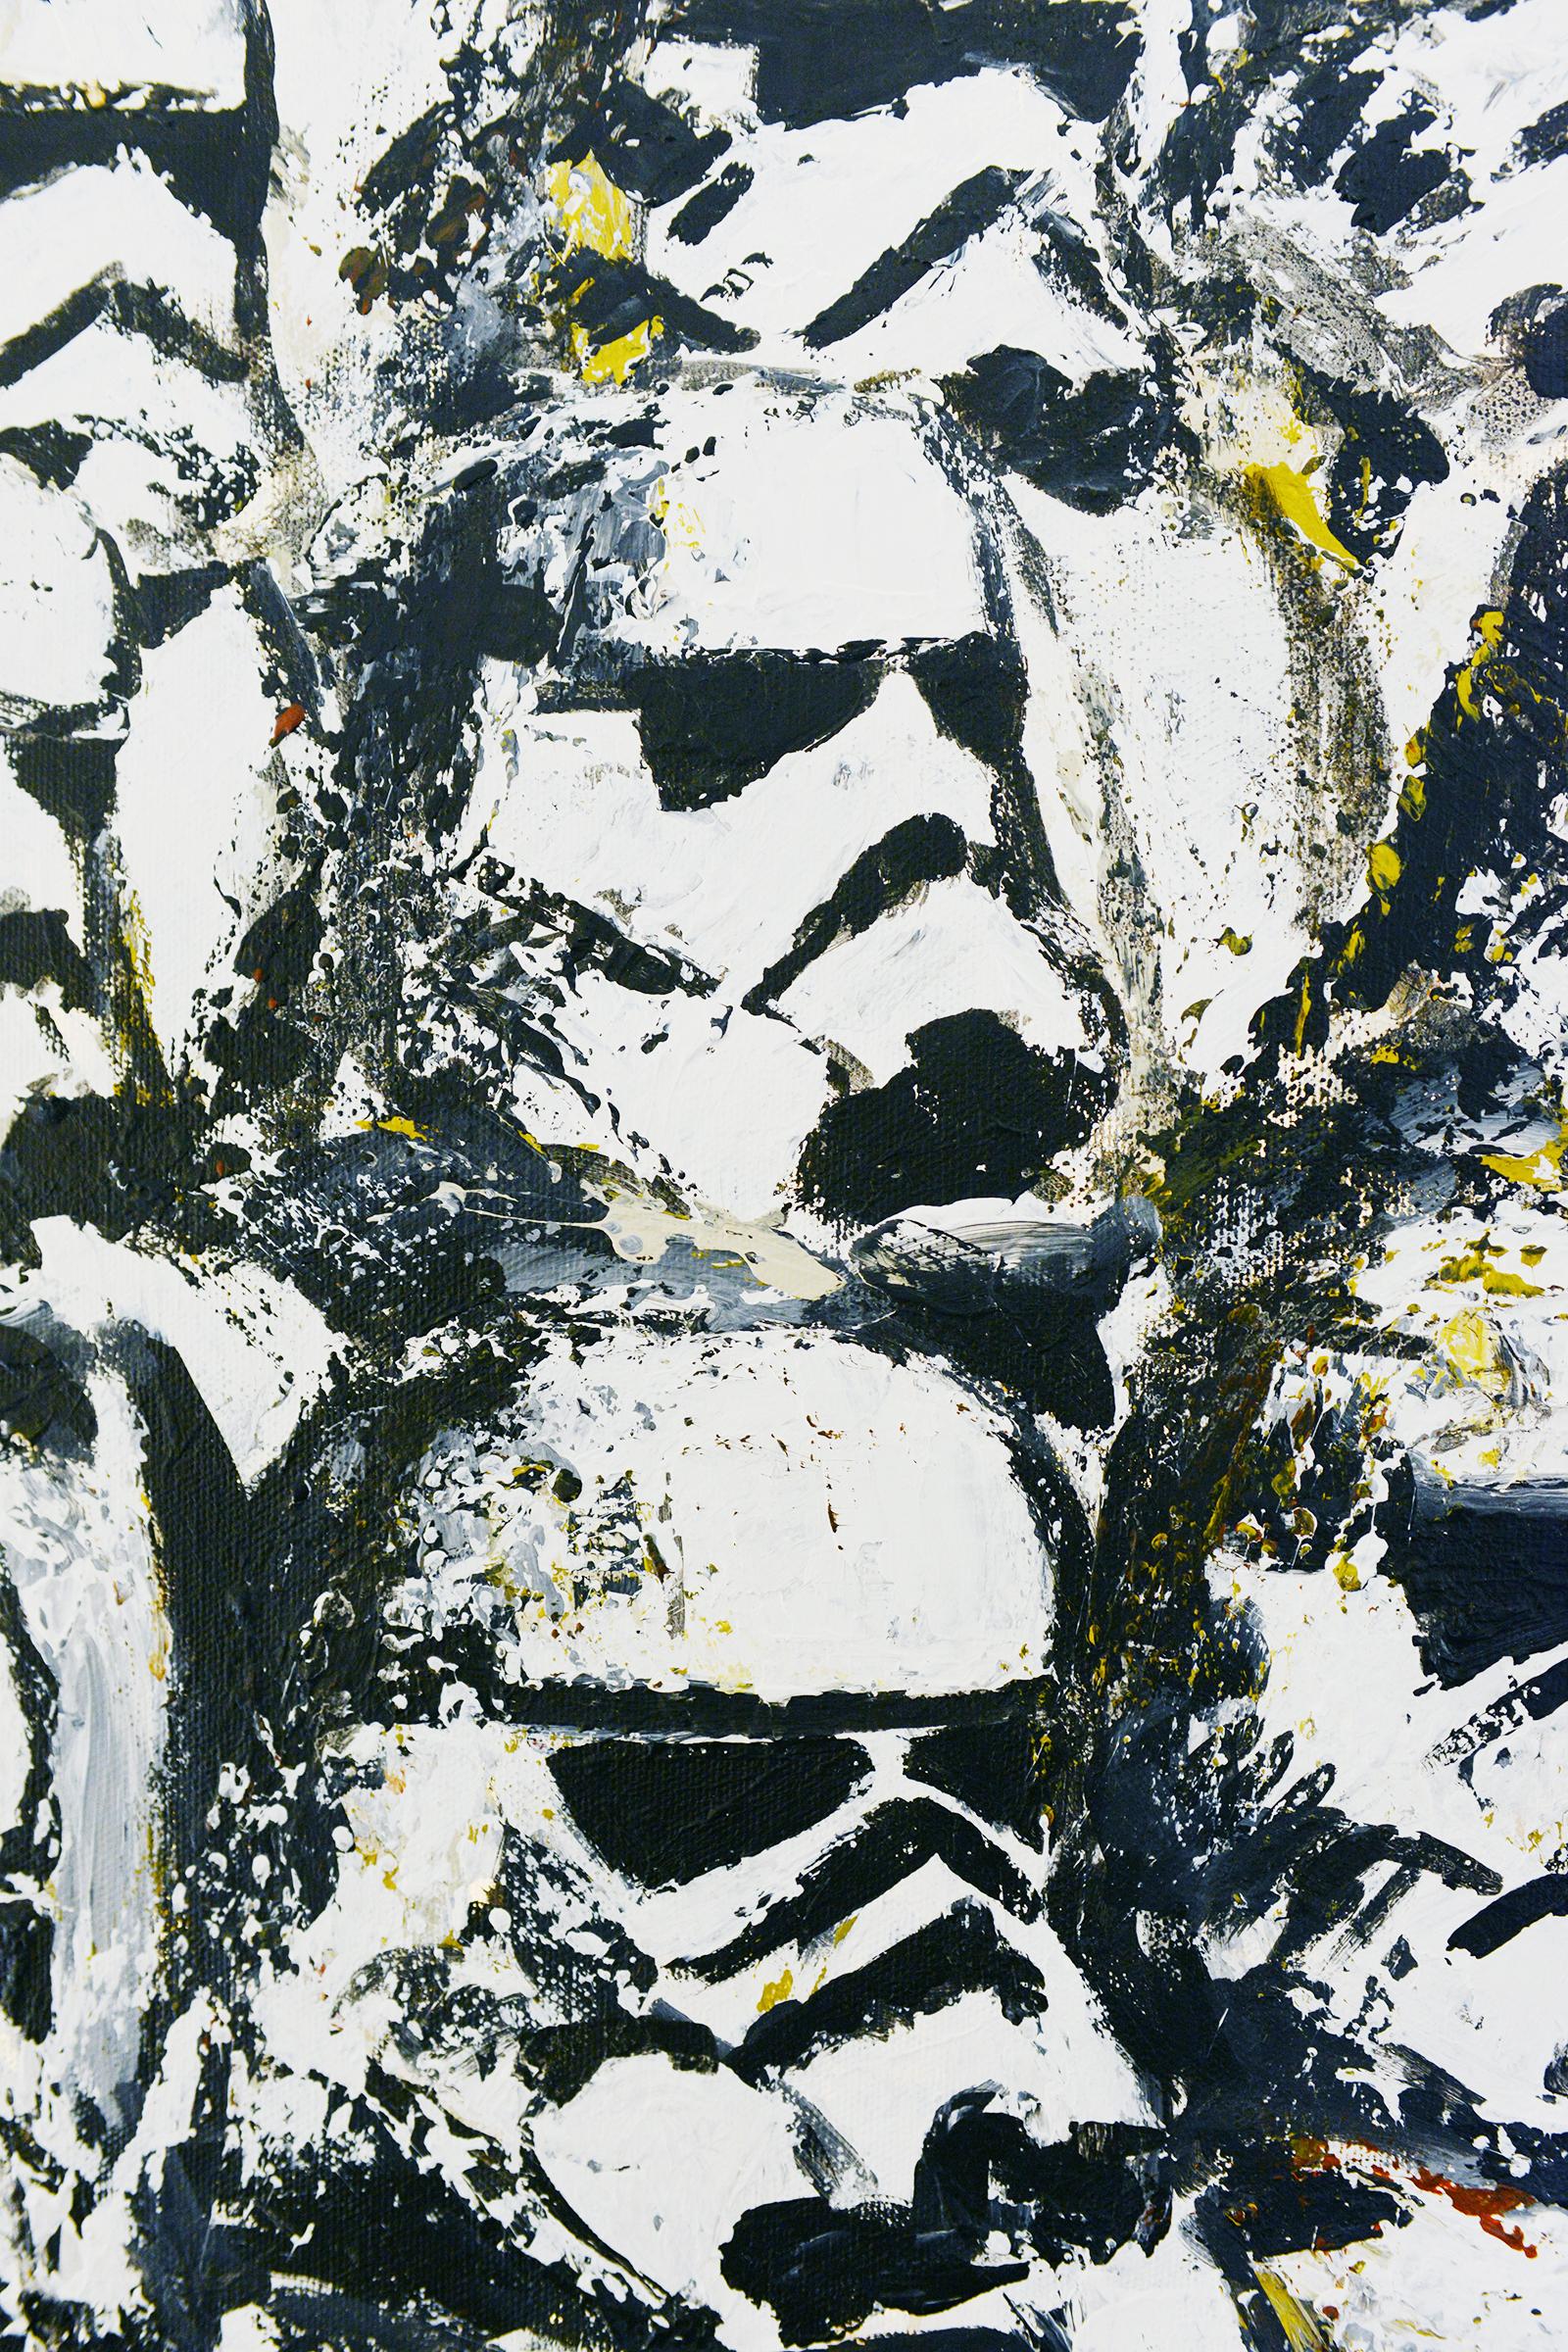 English Stormtroopers Painting For Sale